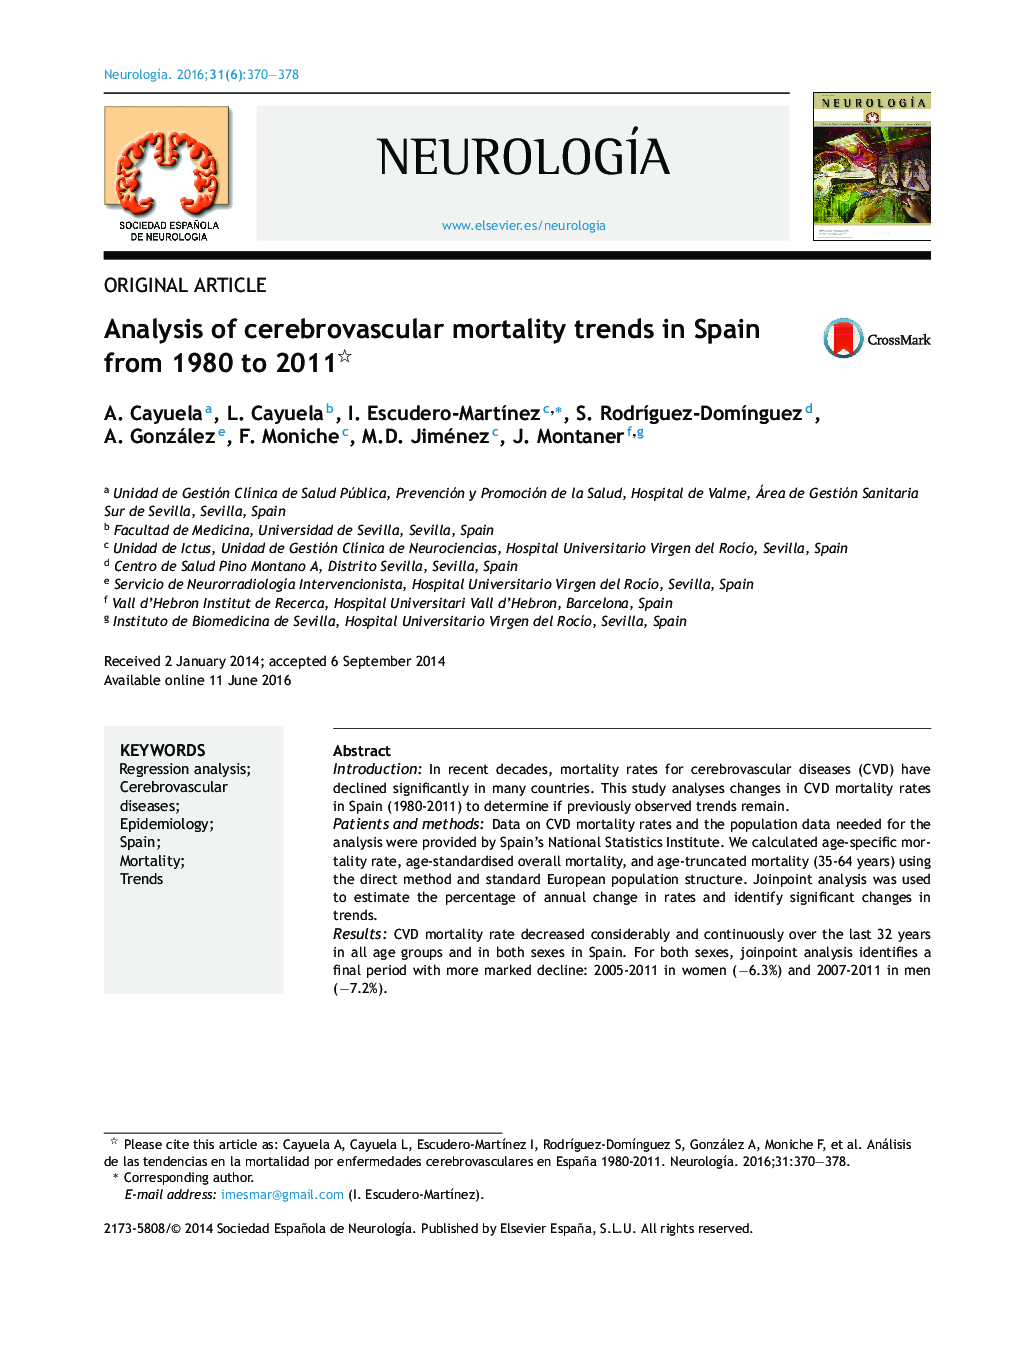 Analysis of cerebrovascular mortality trends in Spain from 1980 to 2011 